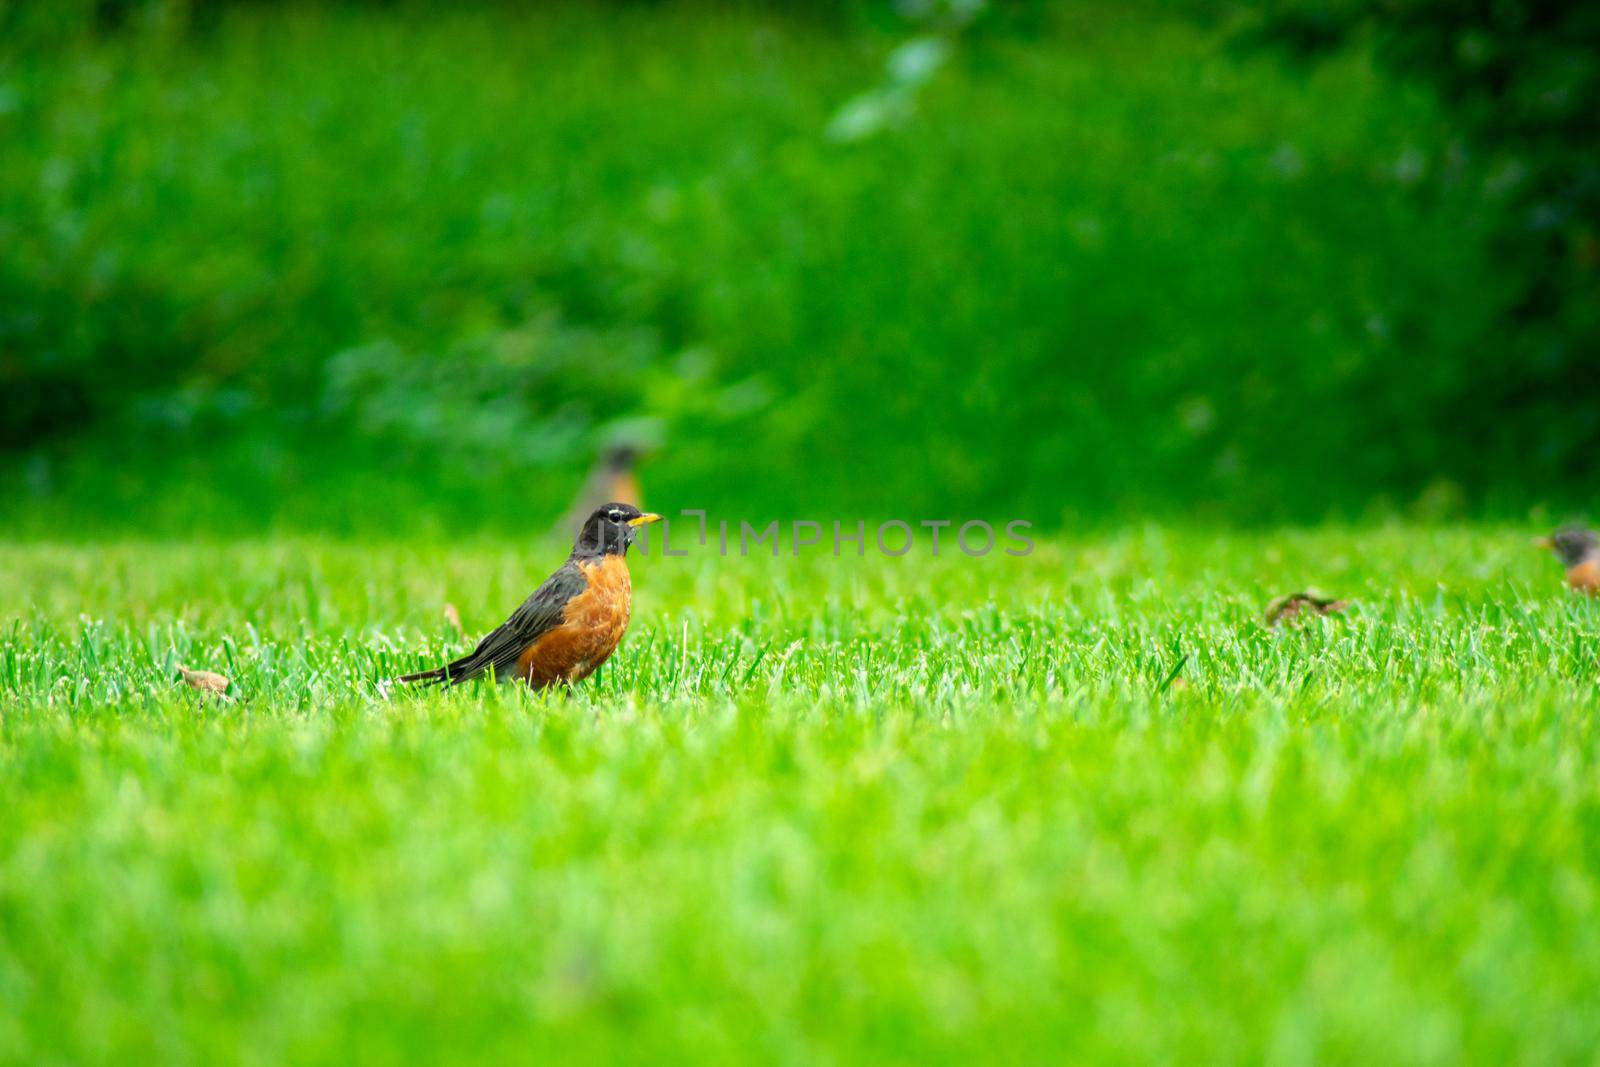 An American Robin in a Field of Grass by bju12290